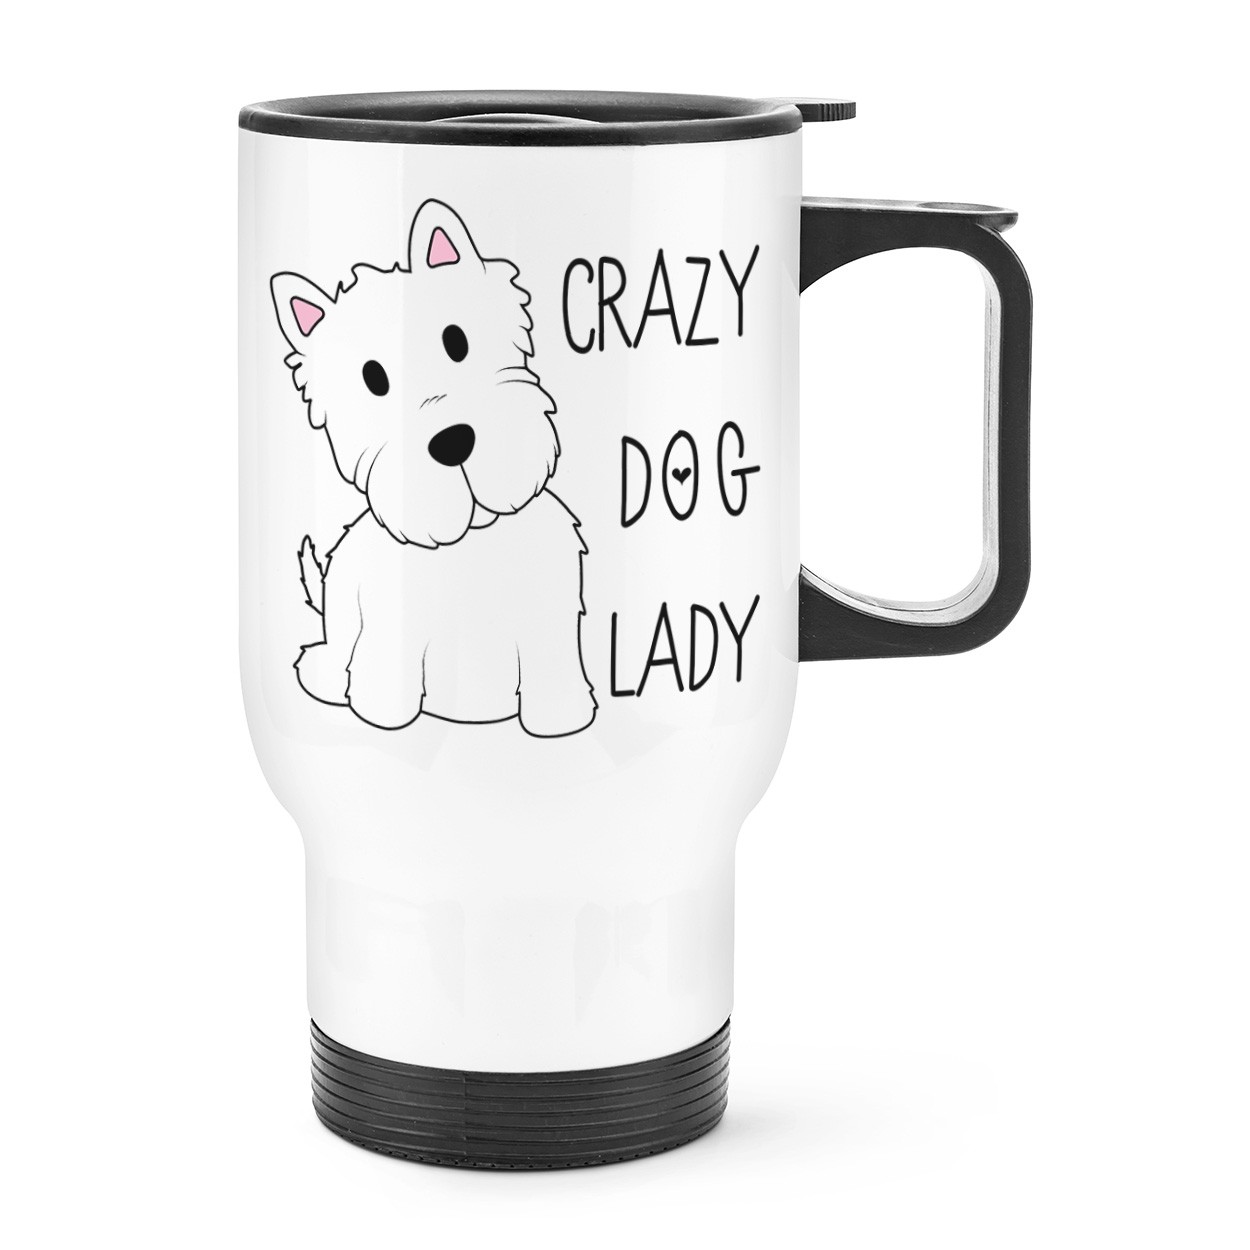 Crazy Dog Lady Travel Mug Cup With Handle